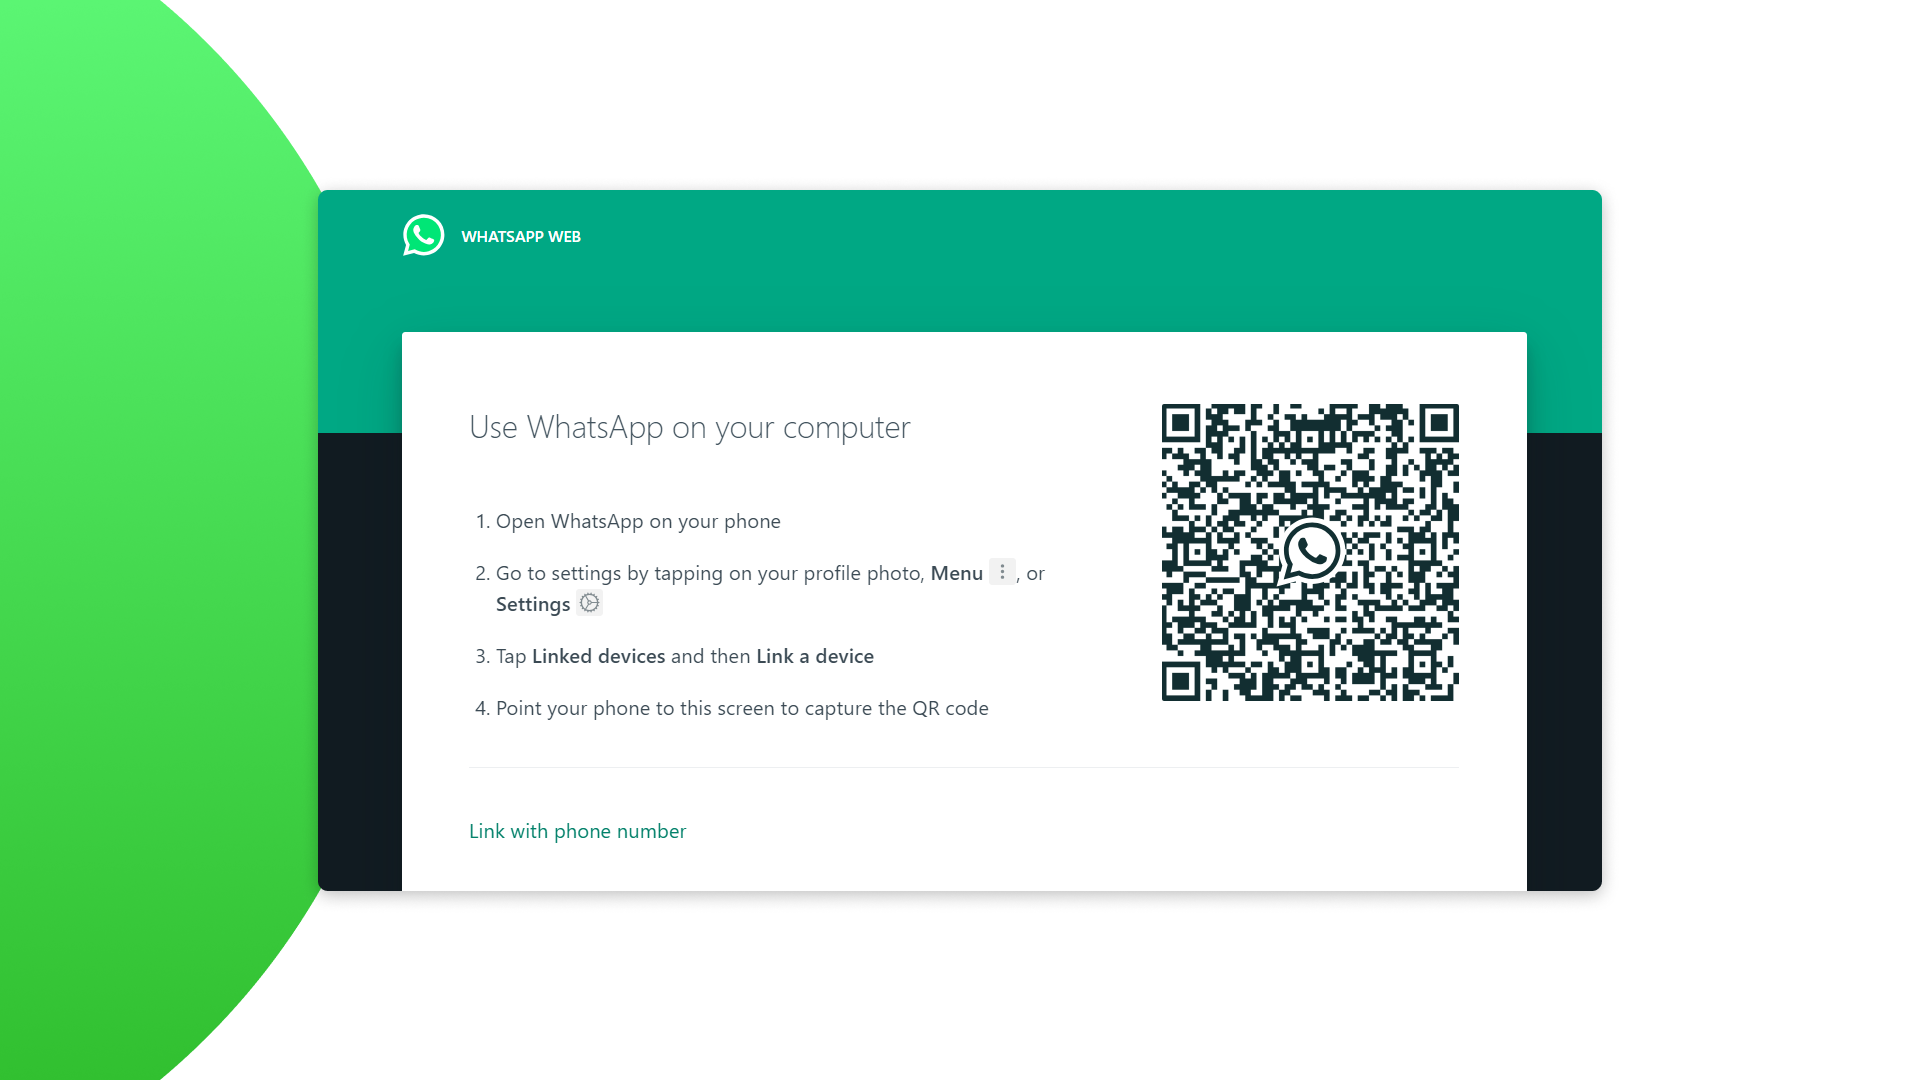 Sign in to WhatsApp on the computer